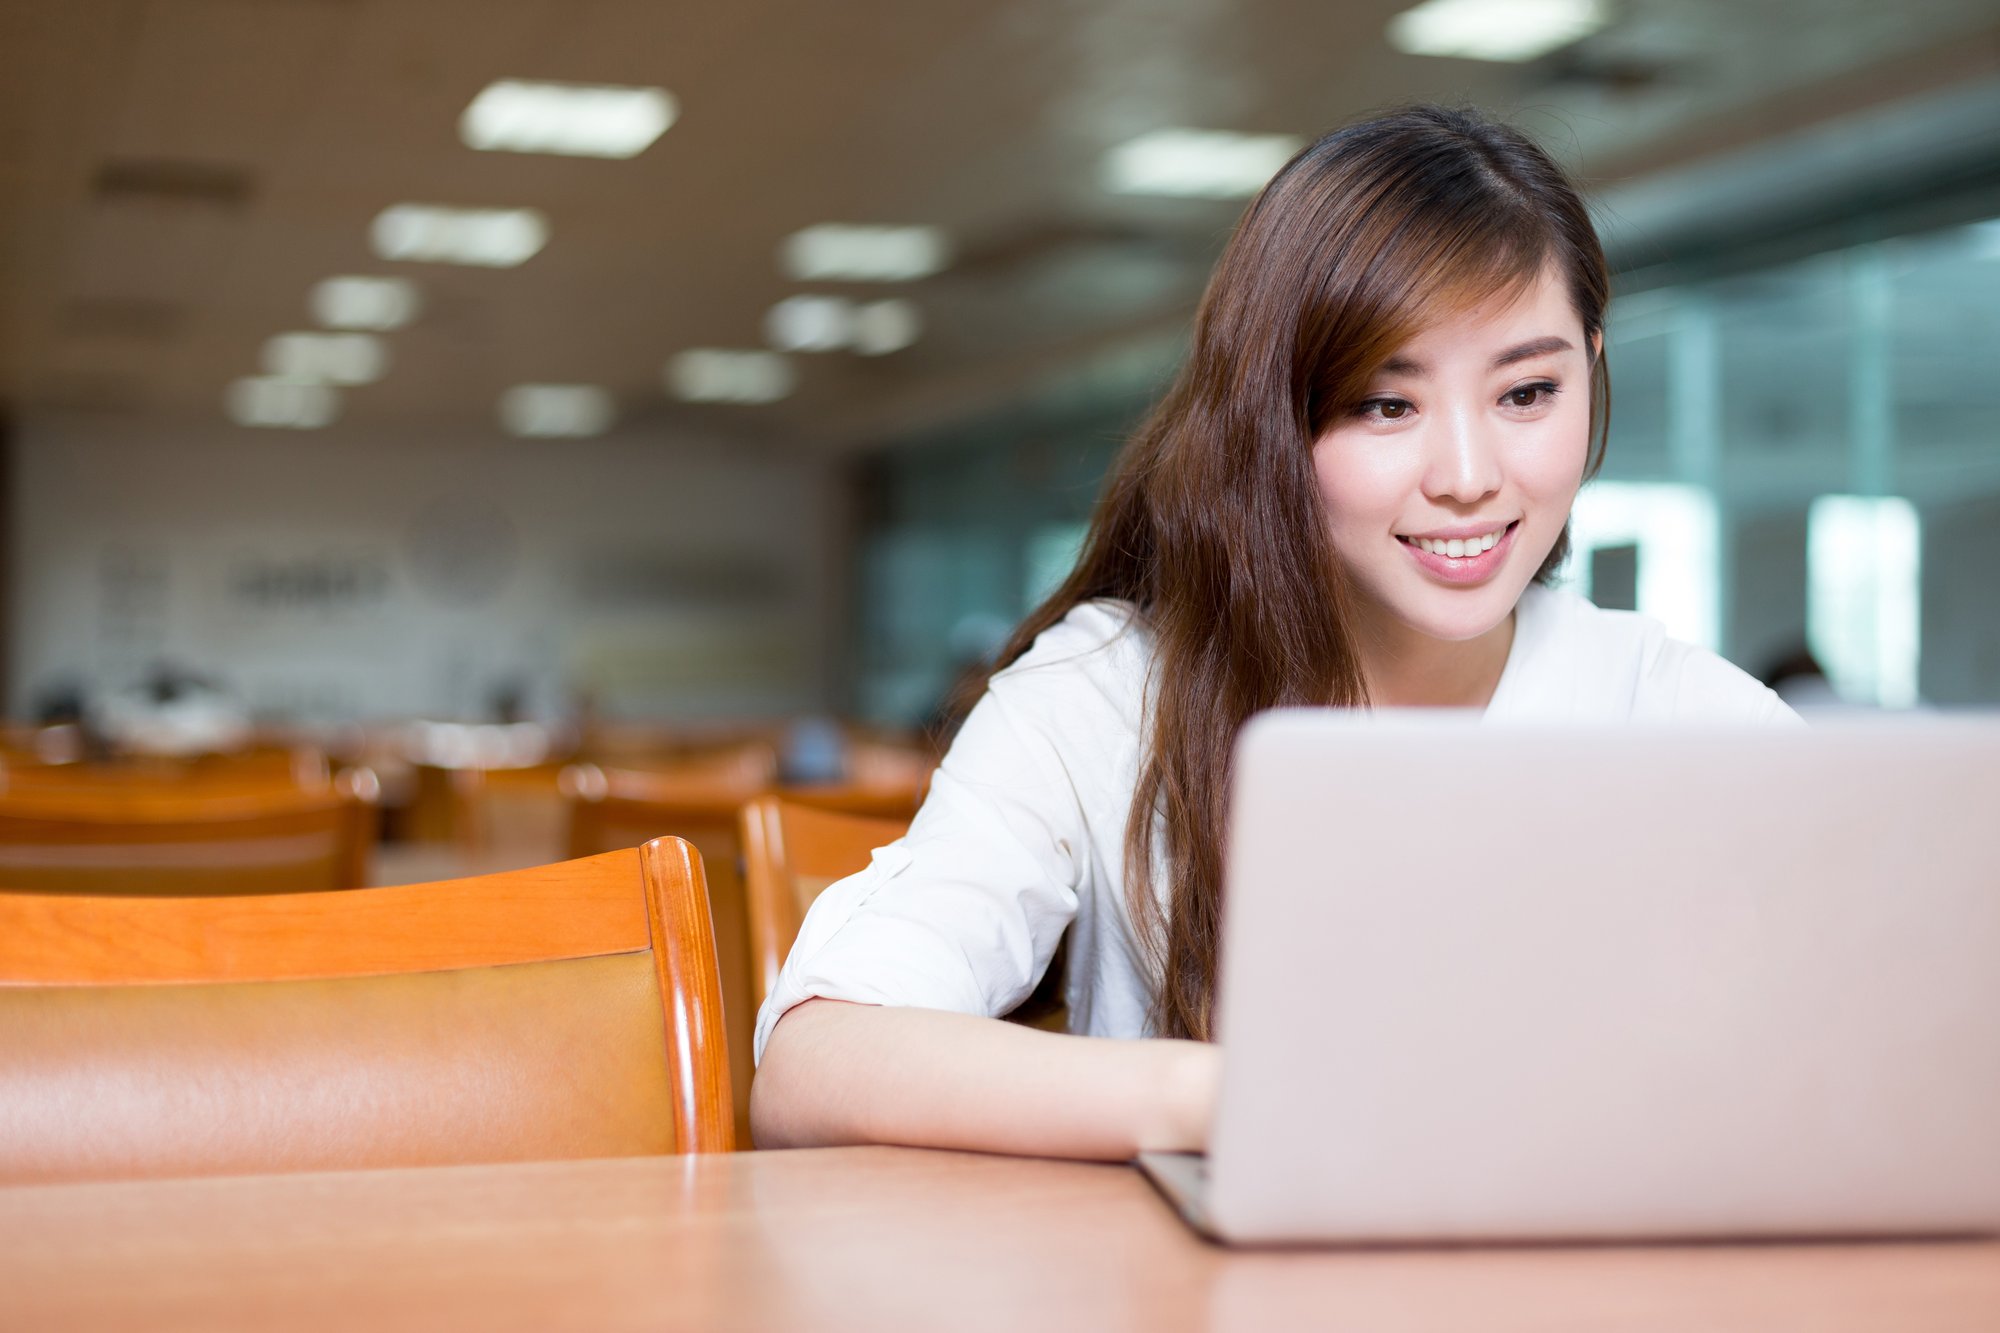 Female student sat at her laptop smiling